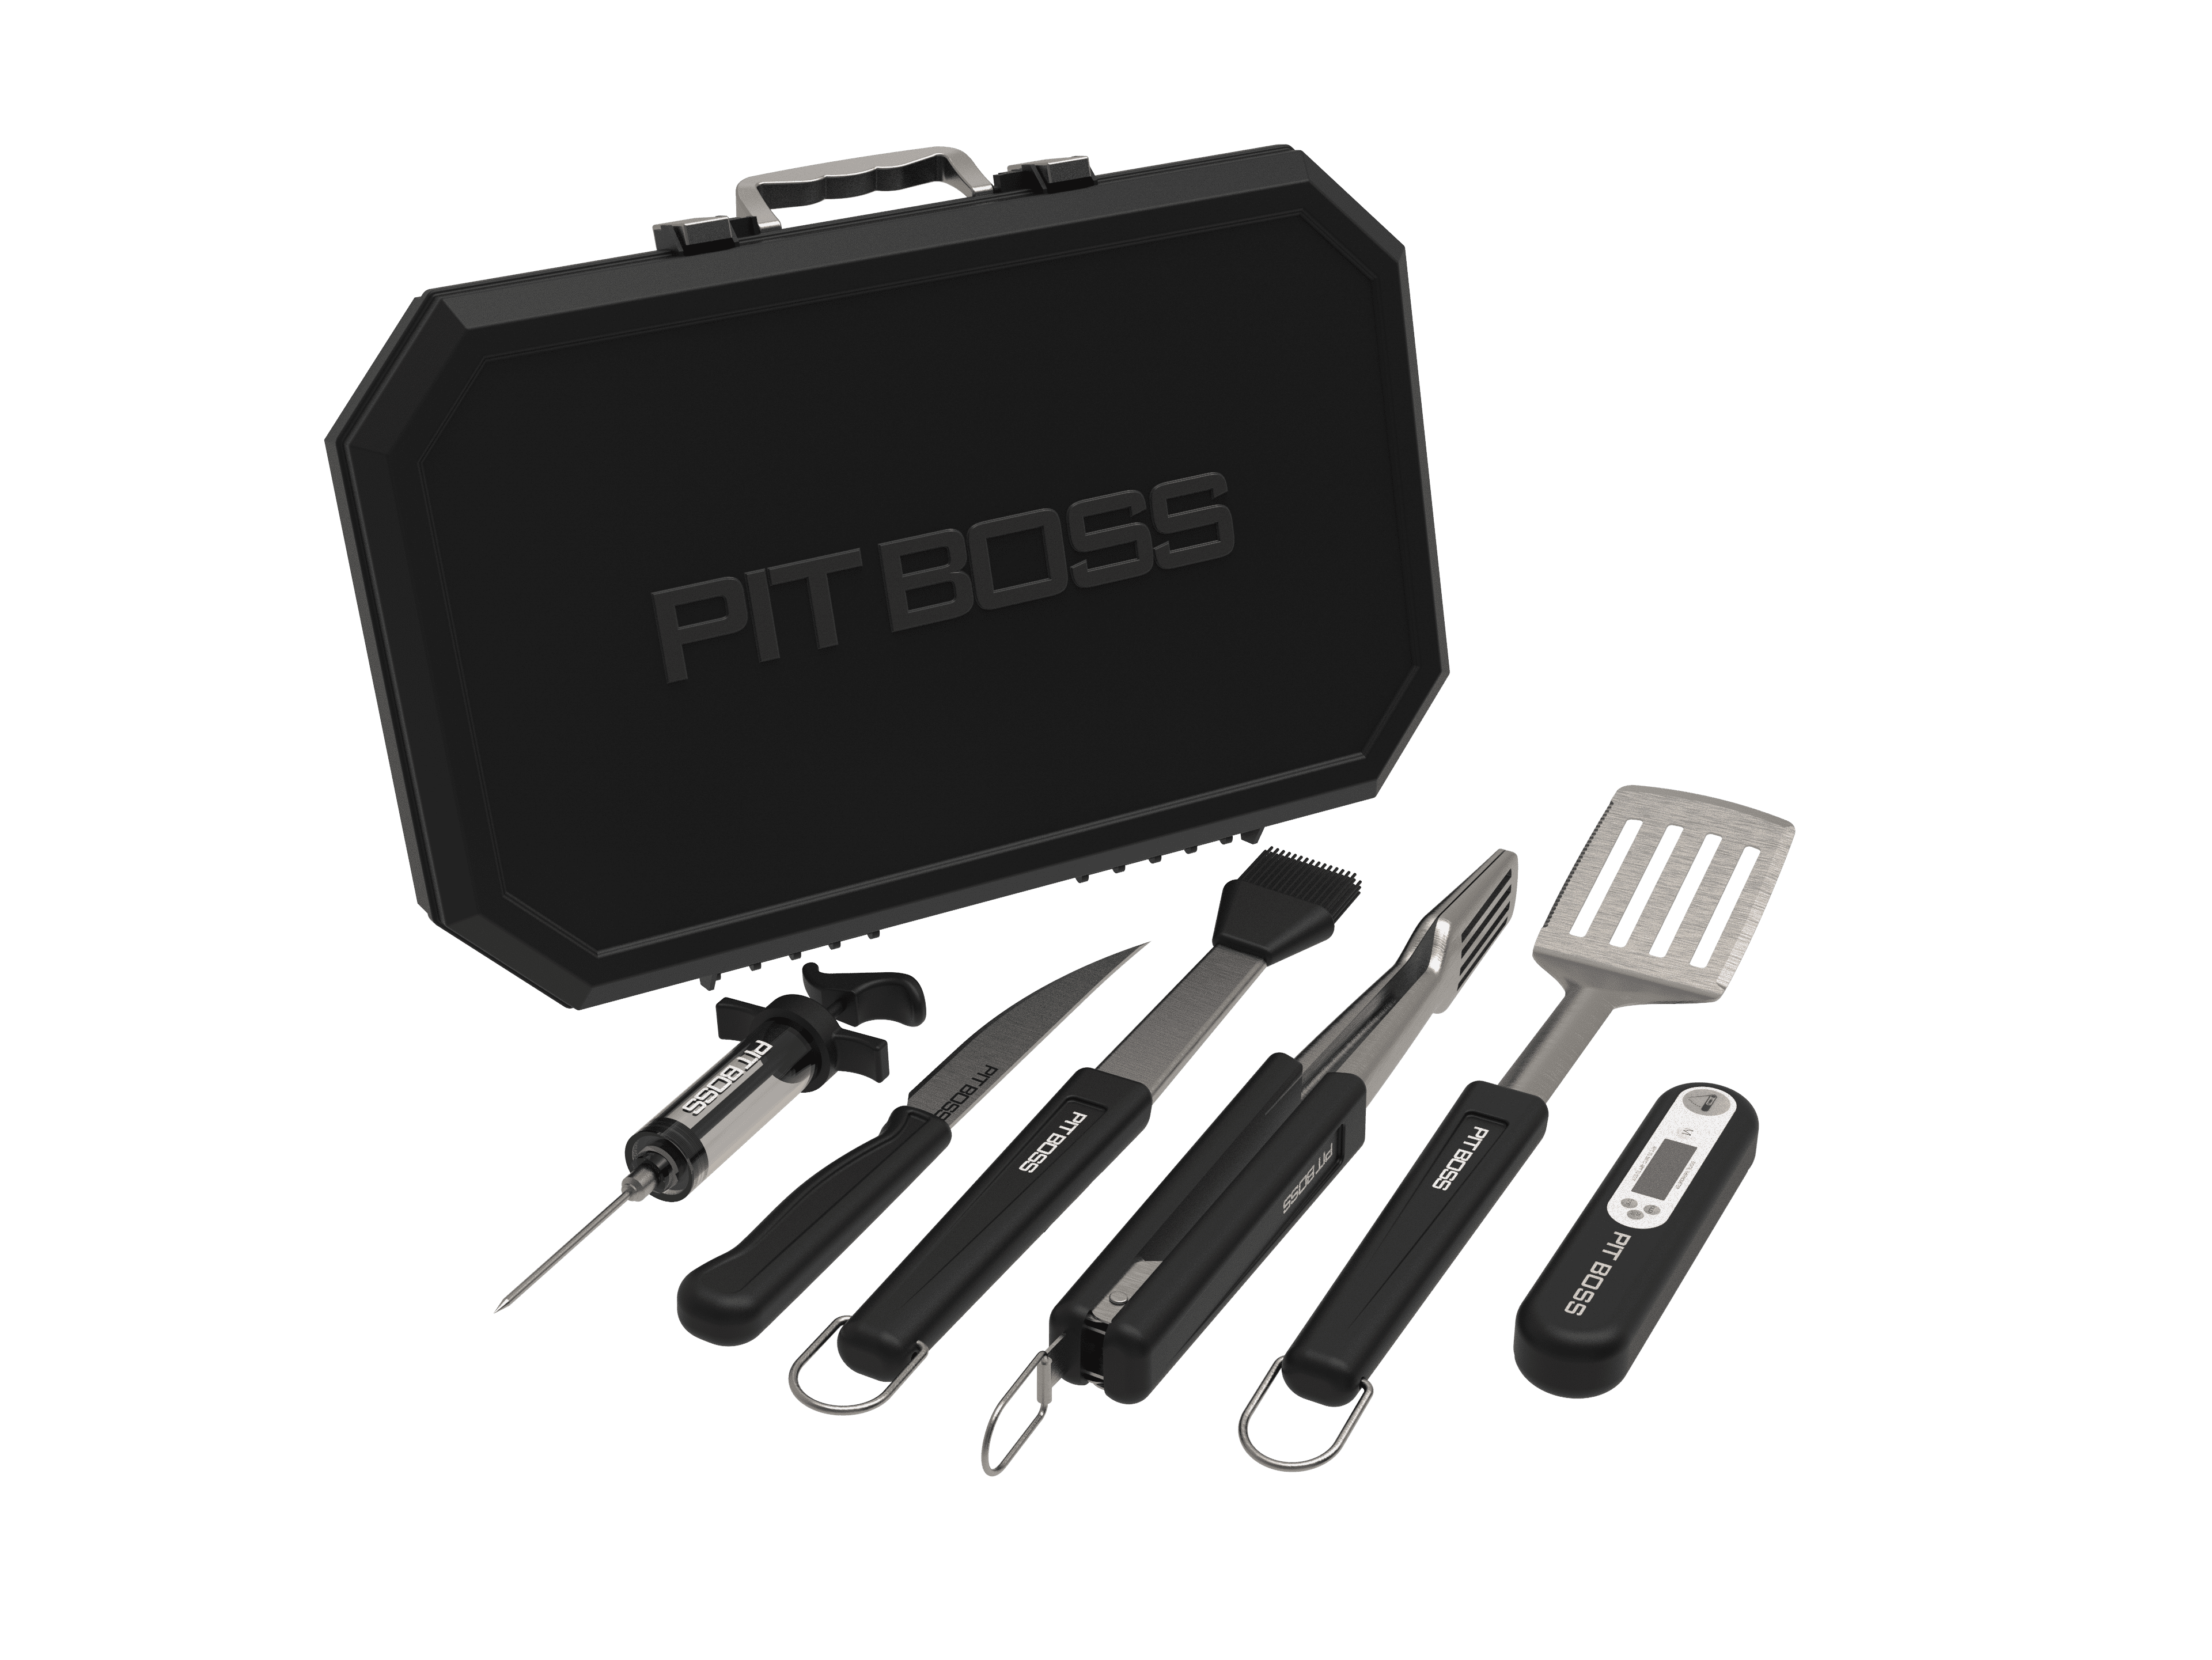 The Pampered Chef Bar-B-Boss BBQ Multi Tool and 12 similar items